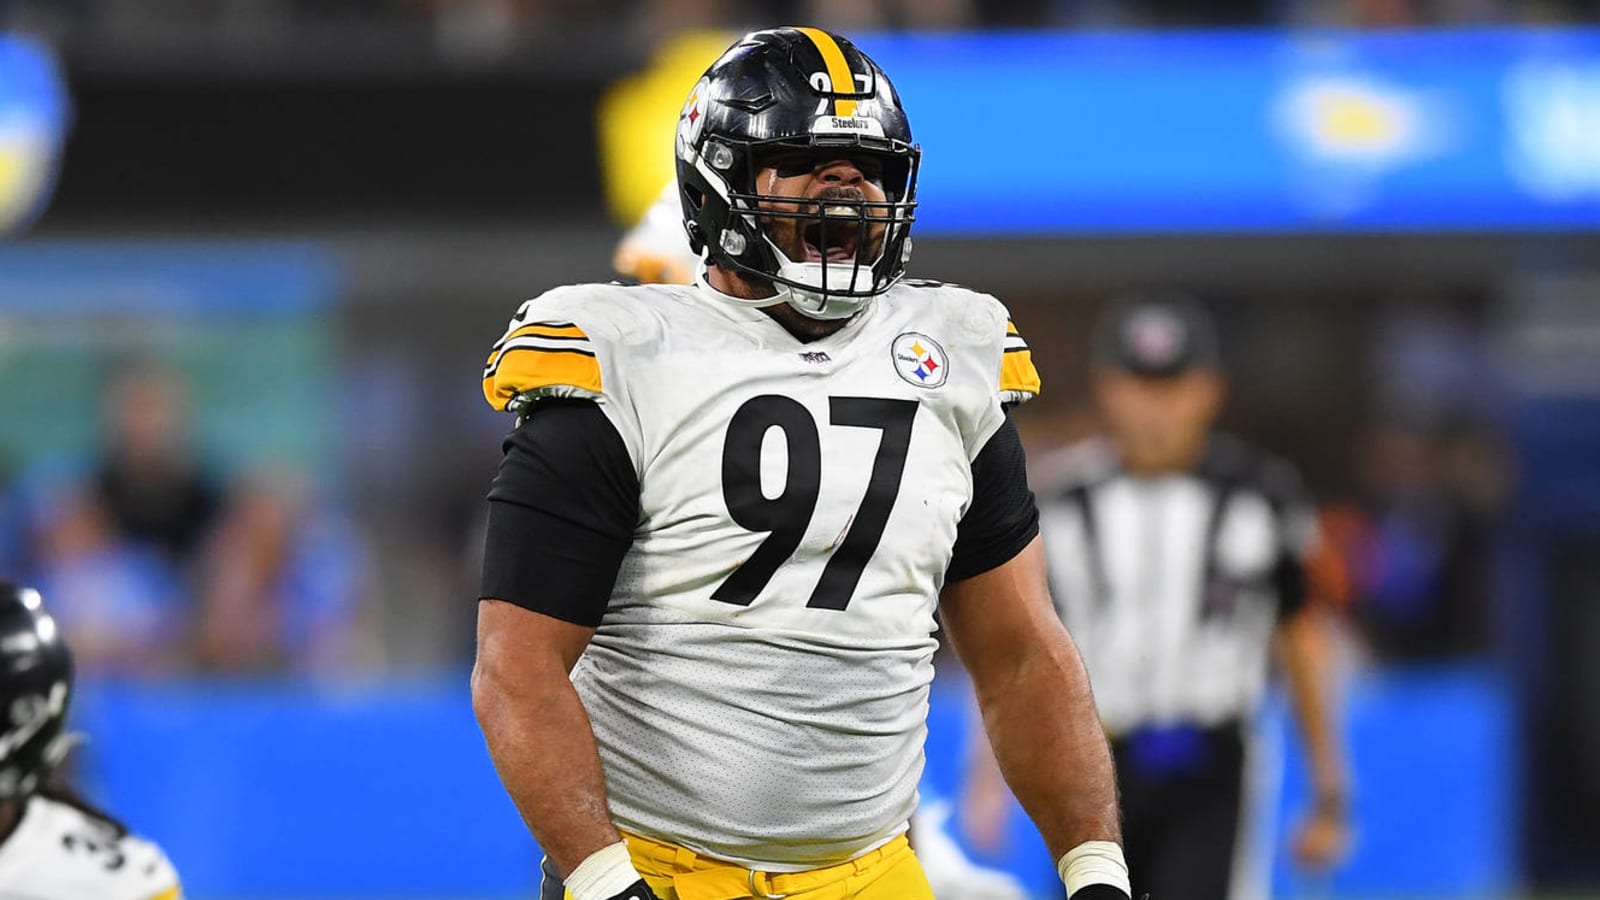 NFL defends decision not to eject Cam Heyward for punch